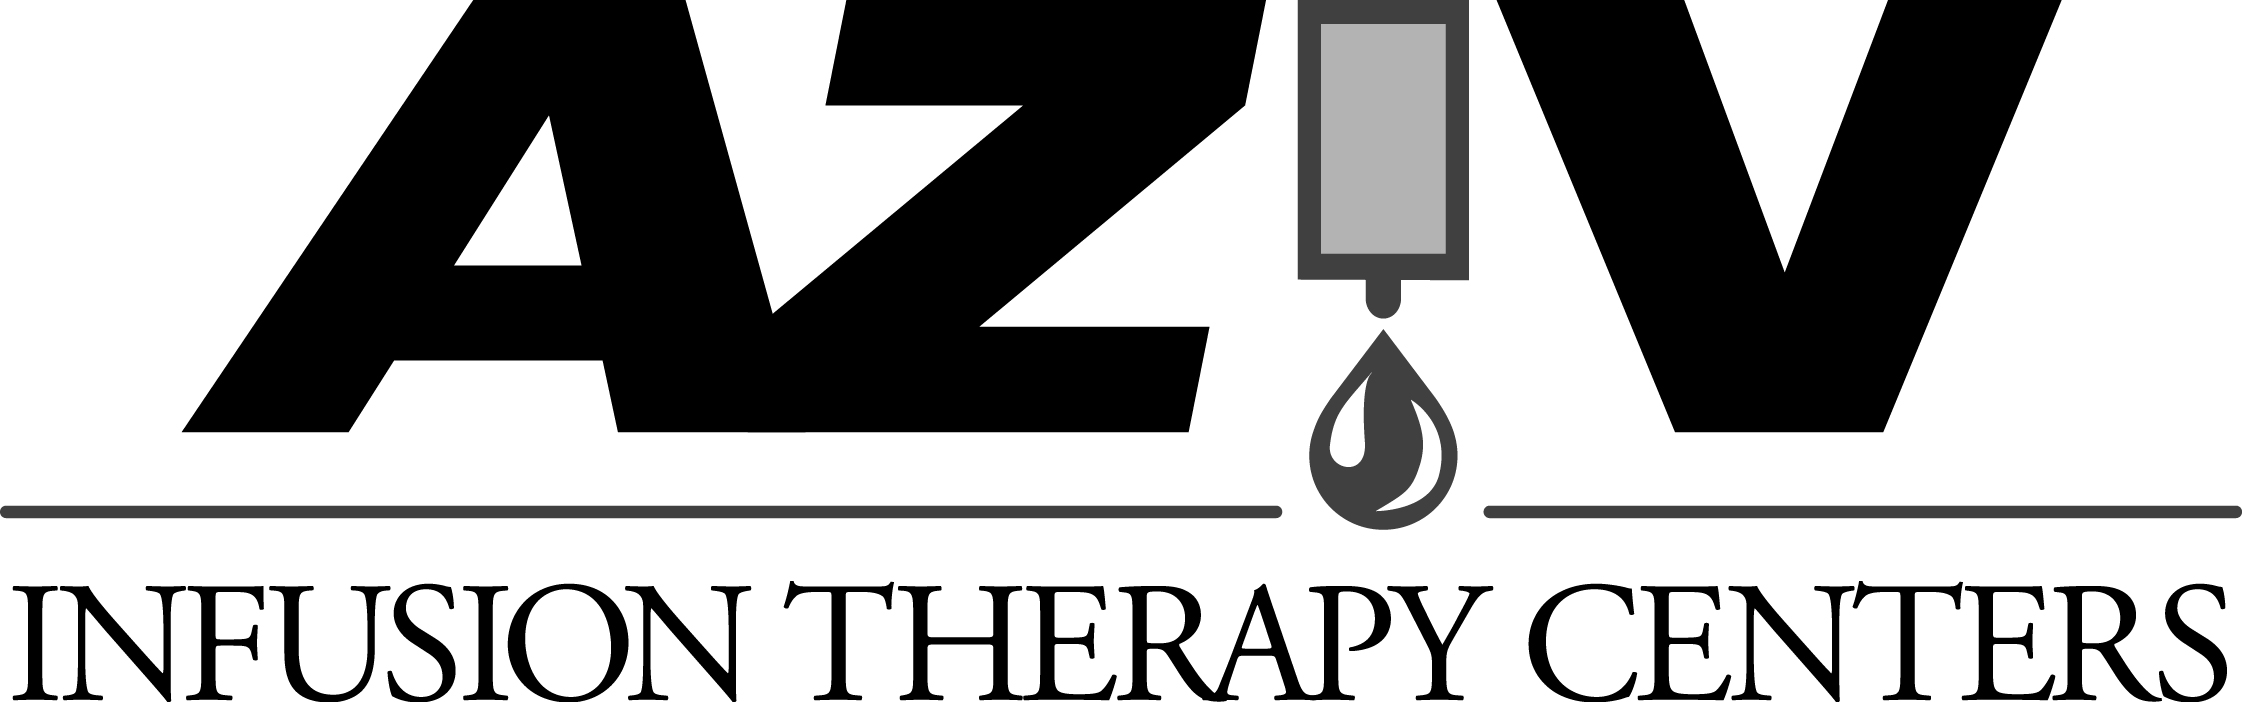 AZIV Infusion Therapy Center